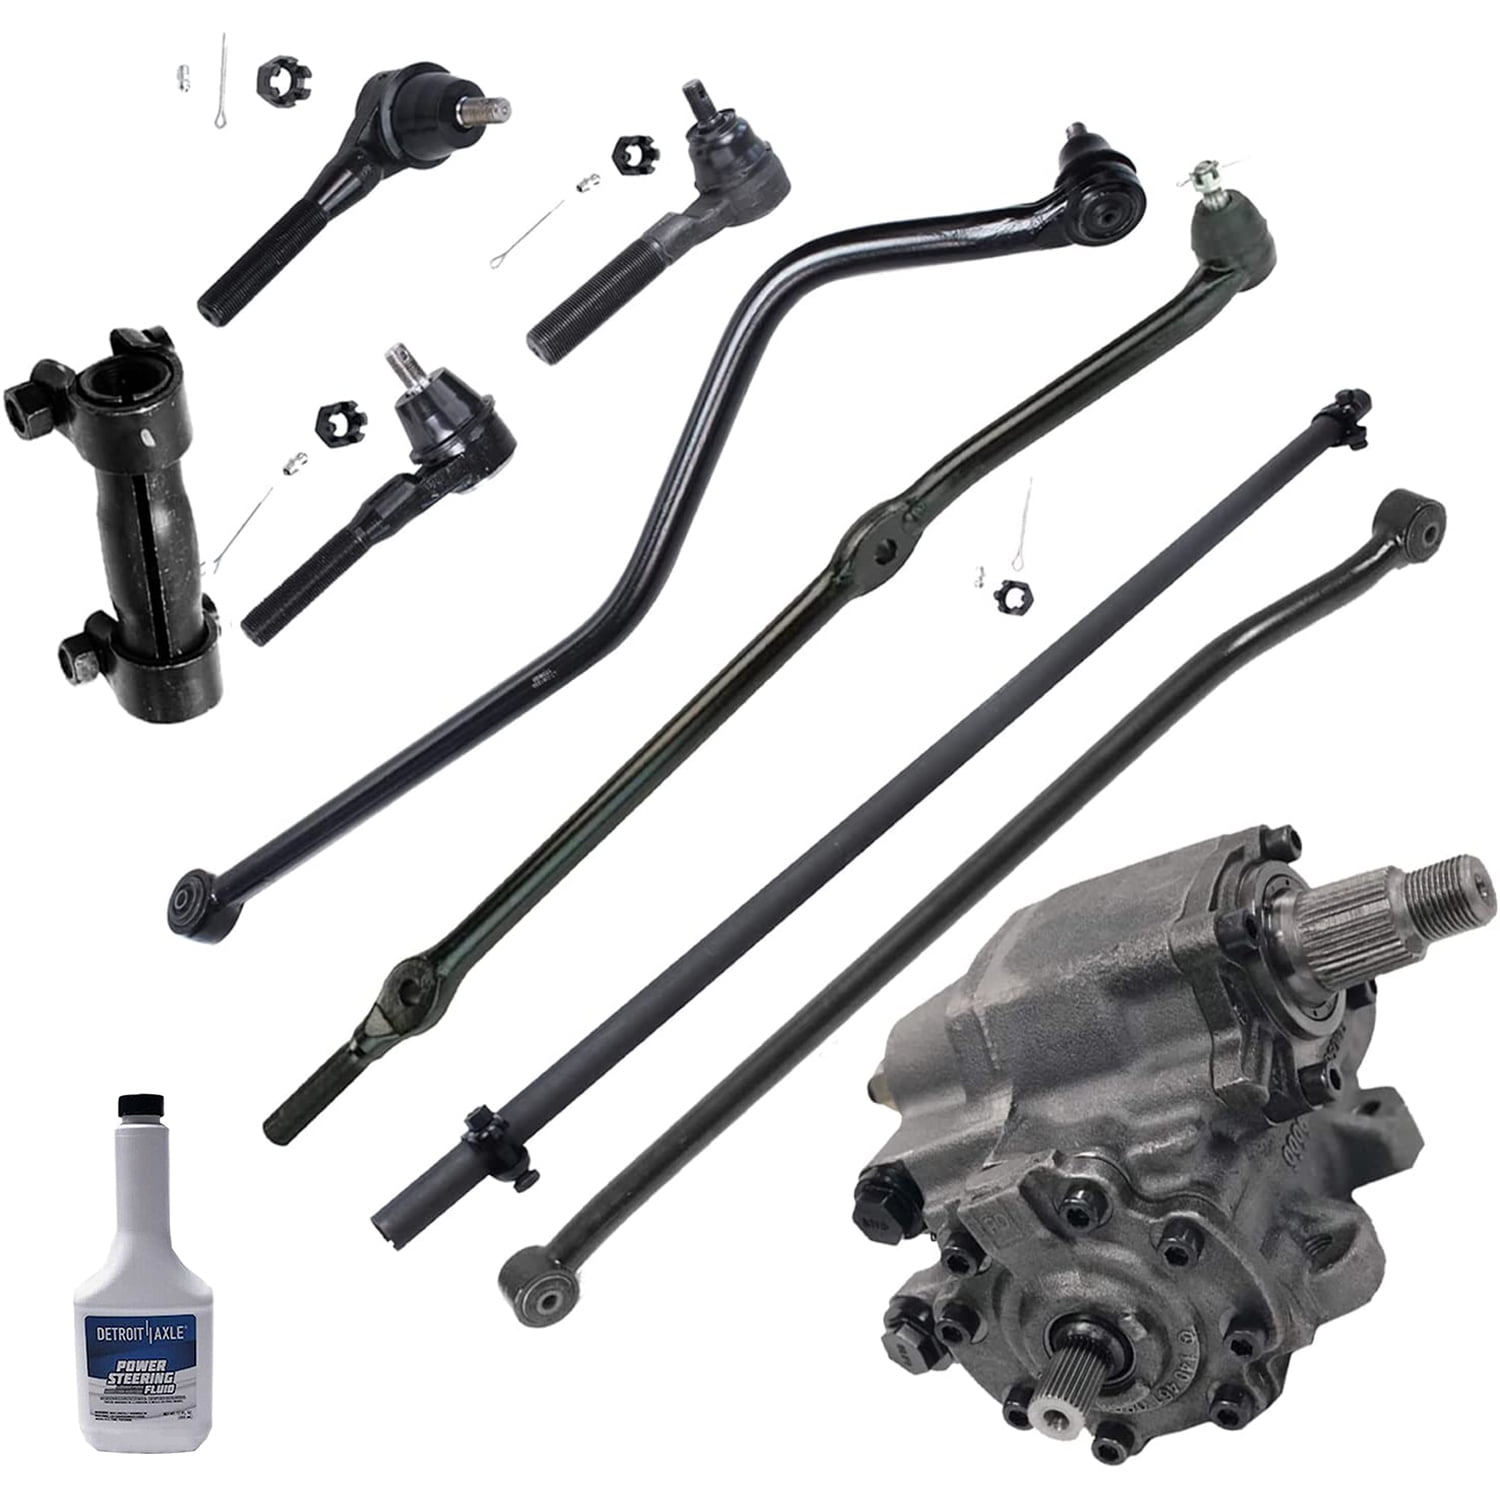 Detroit Axle - Complete Power Steering Gearbox Assembly with Front Inner  Outer Tie Rod, Drag Link, Track Bar Replacement for 2003-2006 Jeep Wrangler  - 9pc Set 